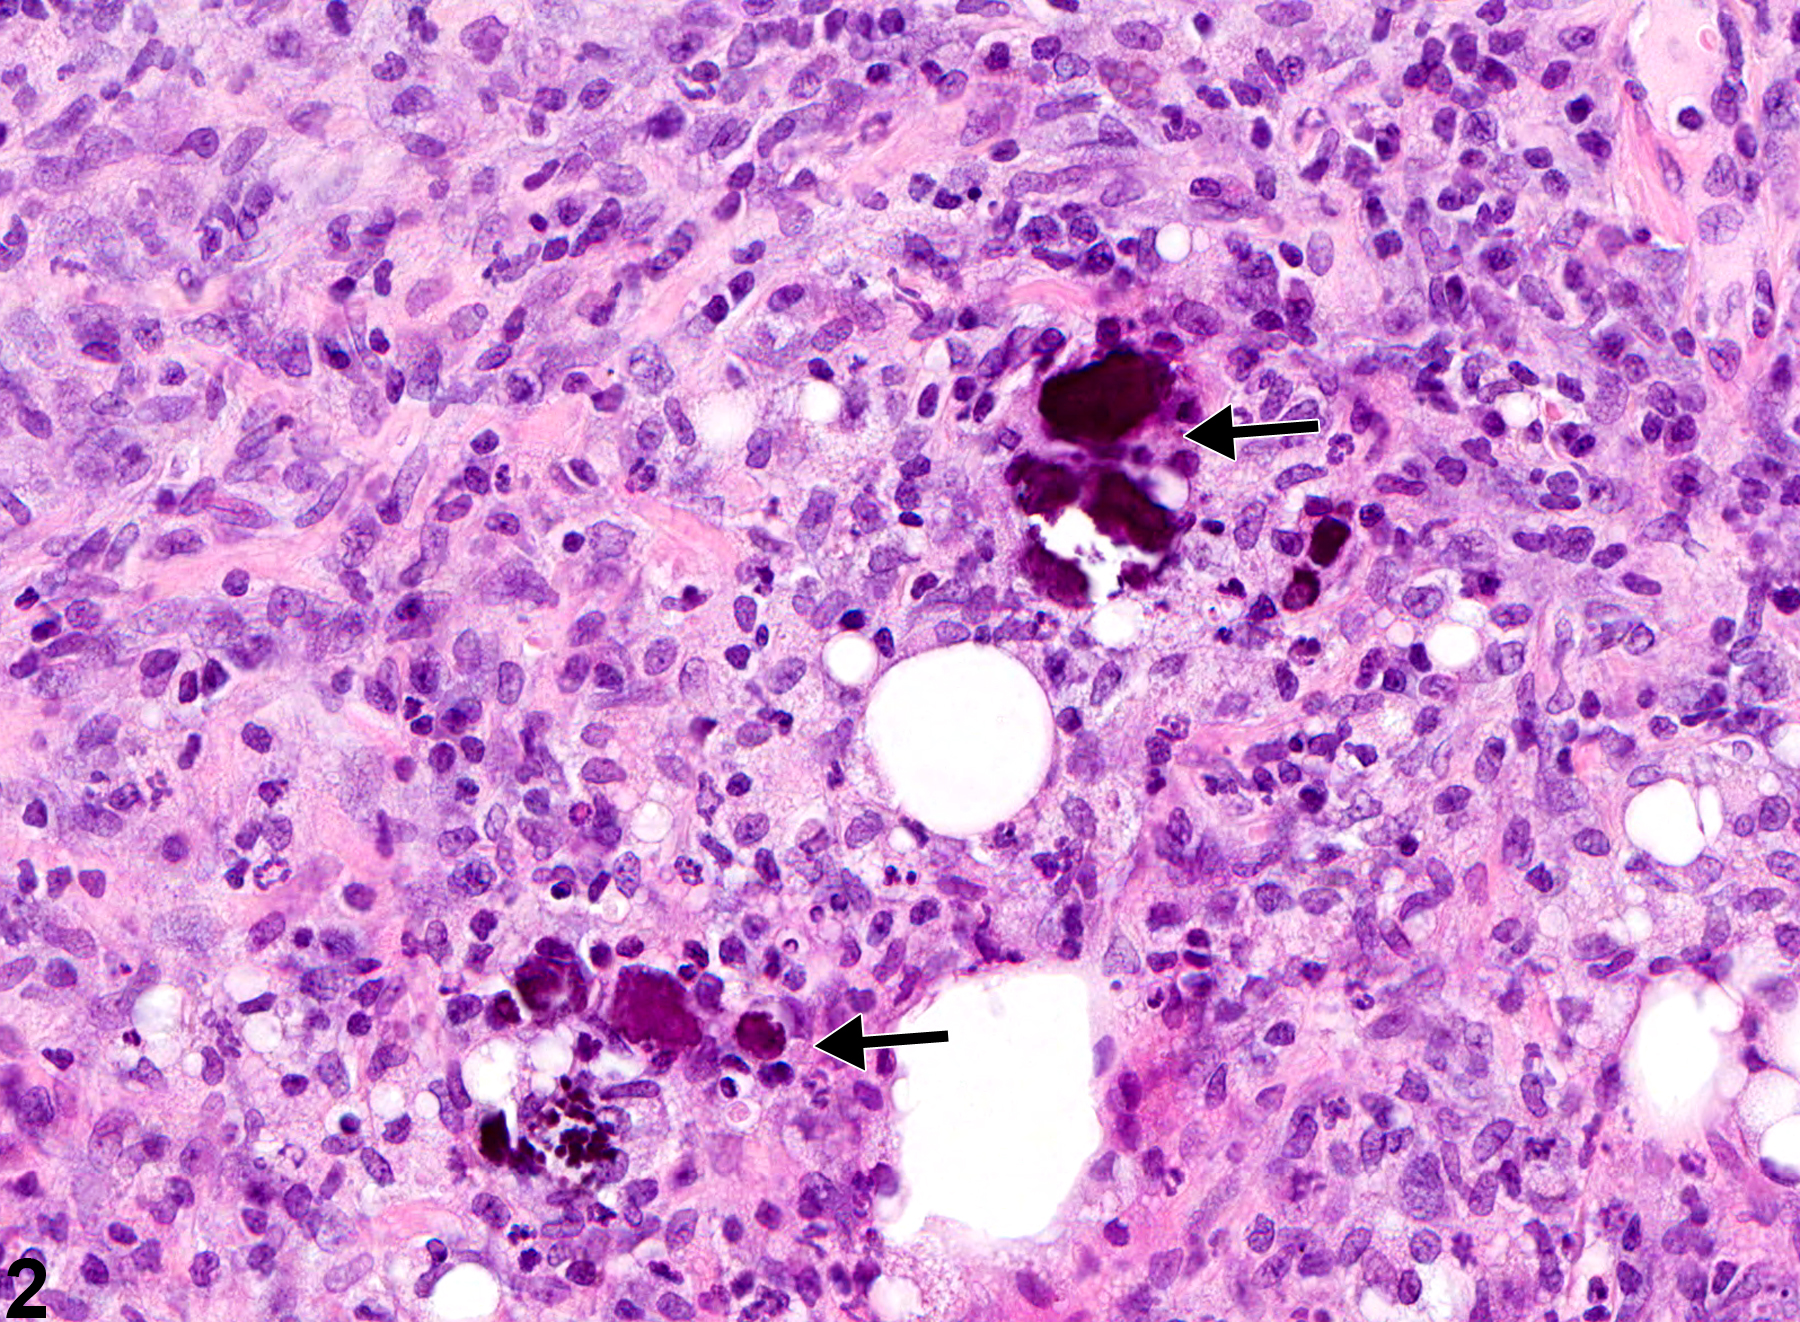 Image of mineralization in the preputial gland from a male F344/N rat in a subchronic study